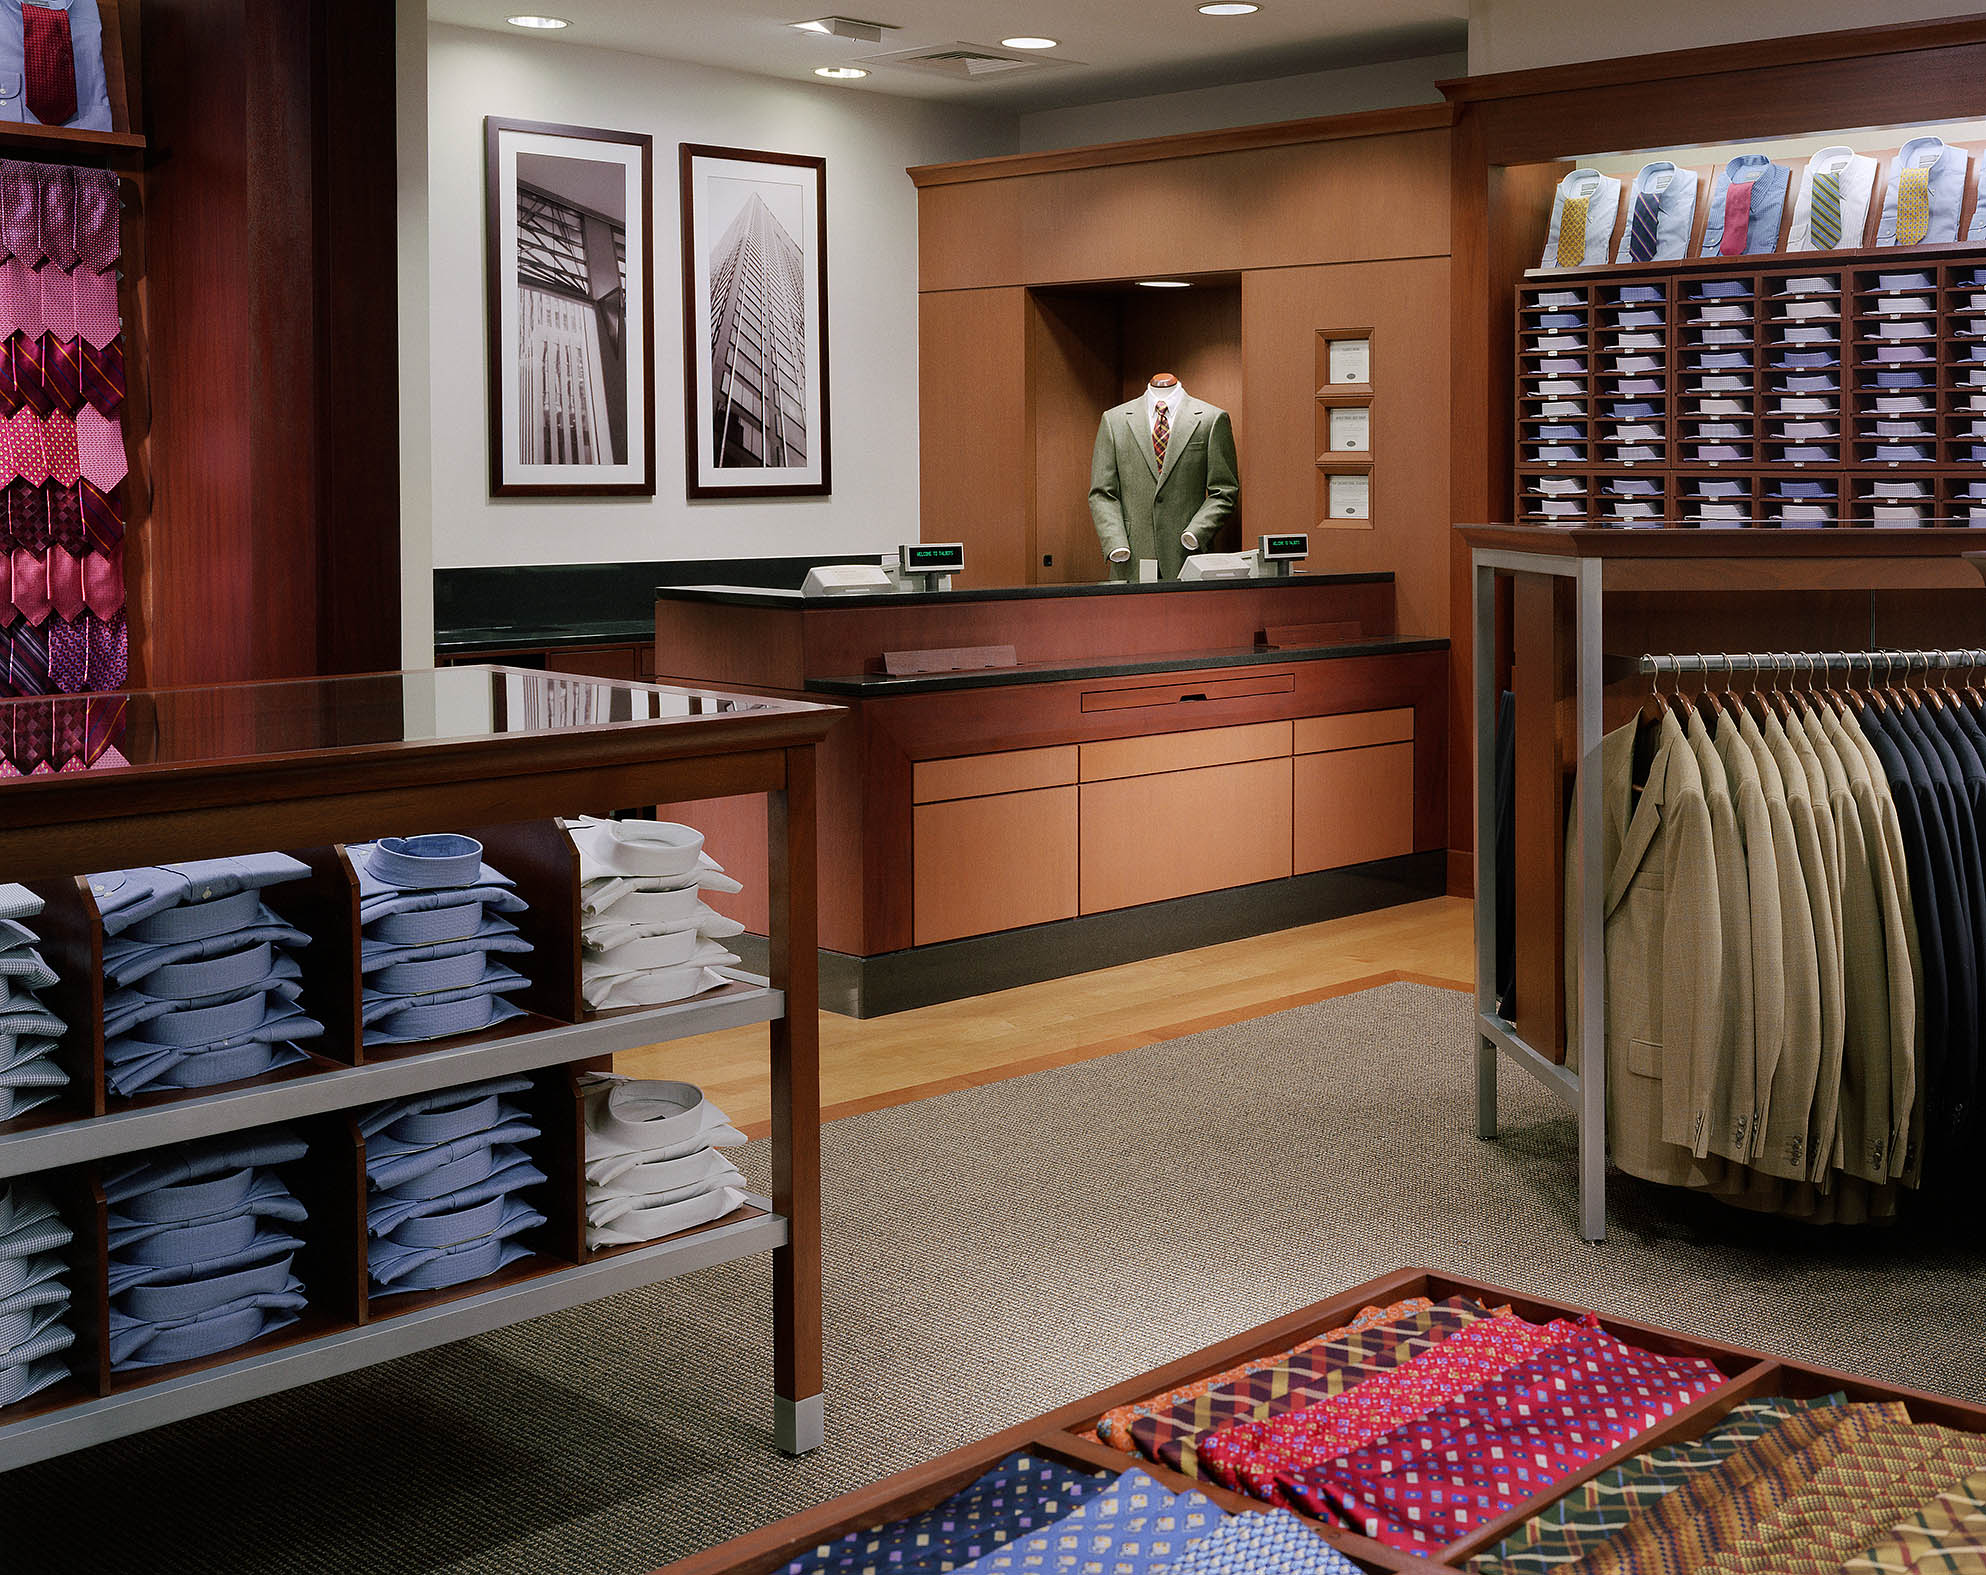 Retail Photography by Mike Butler